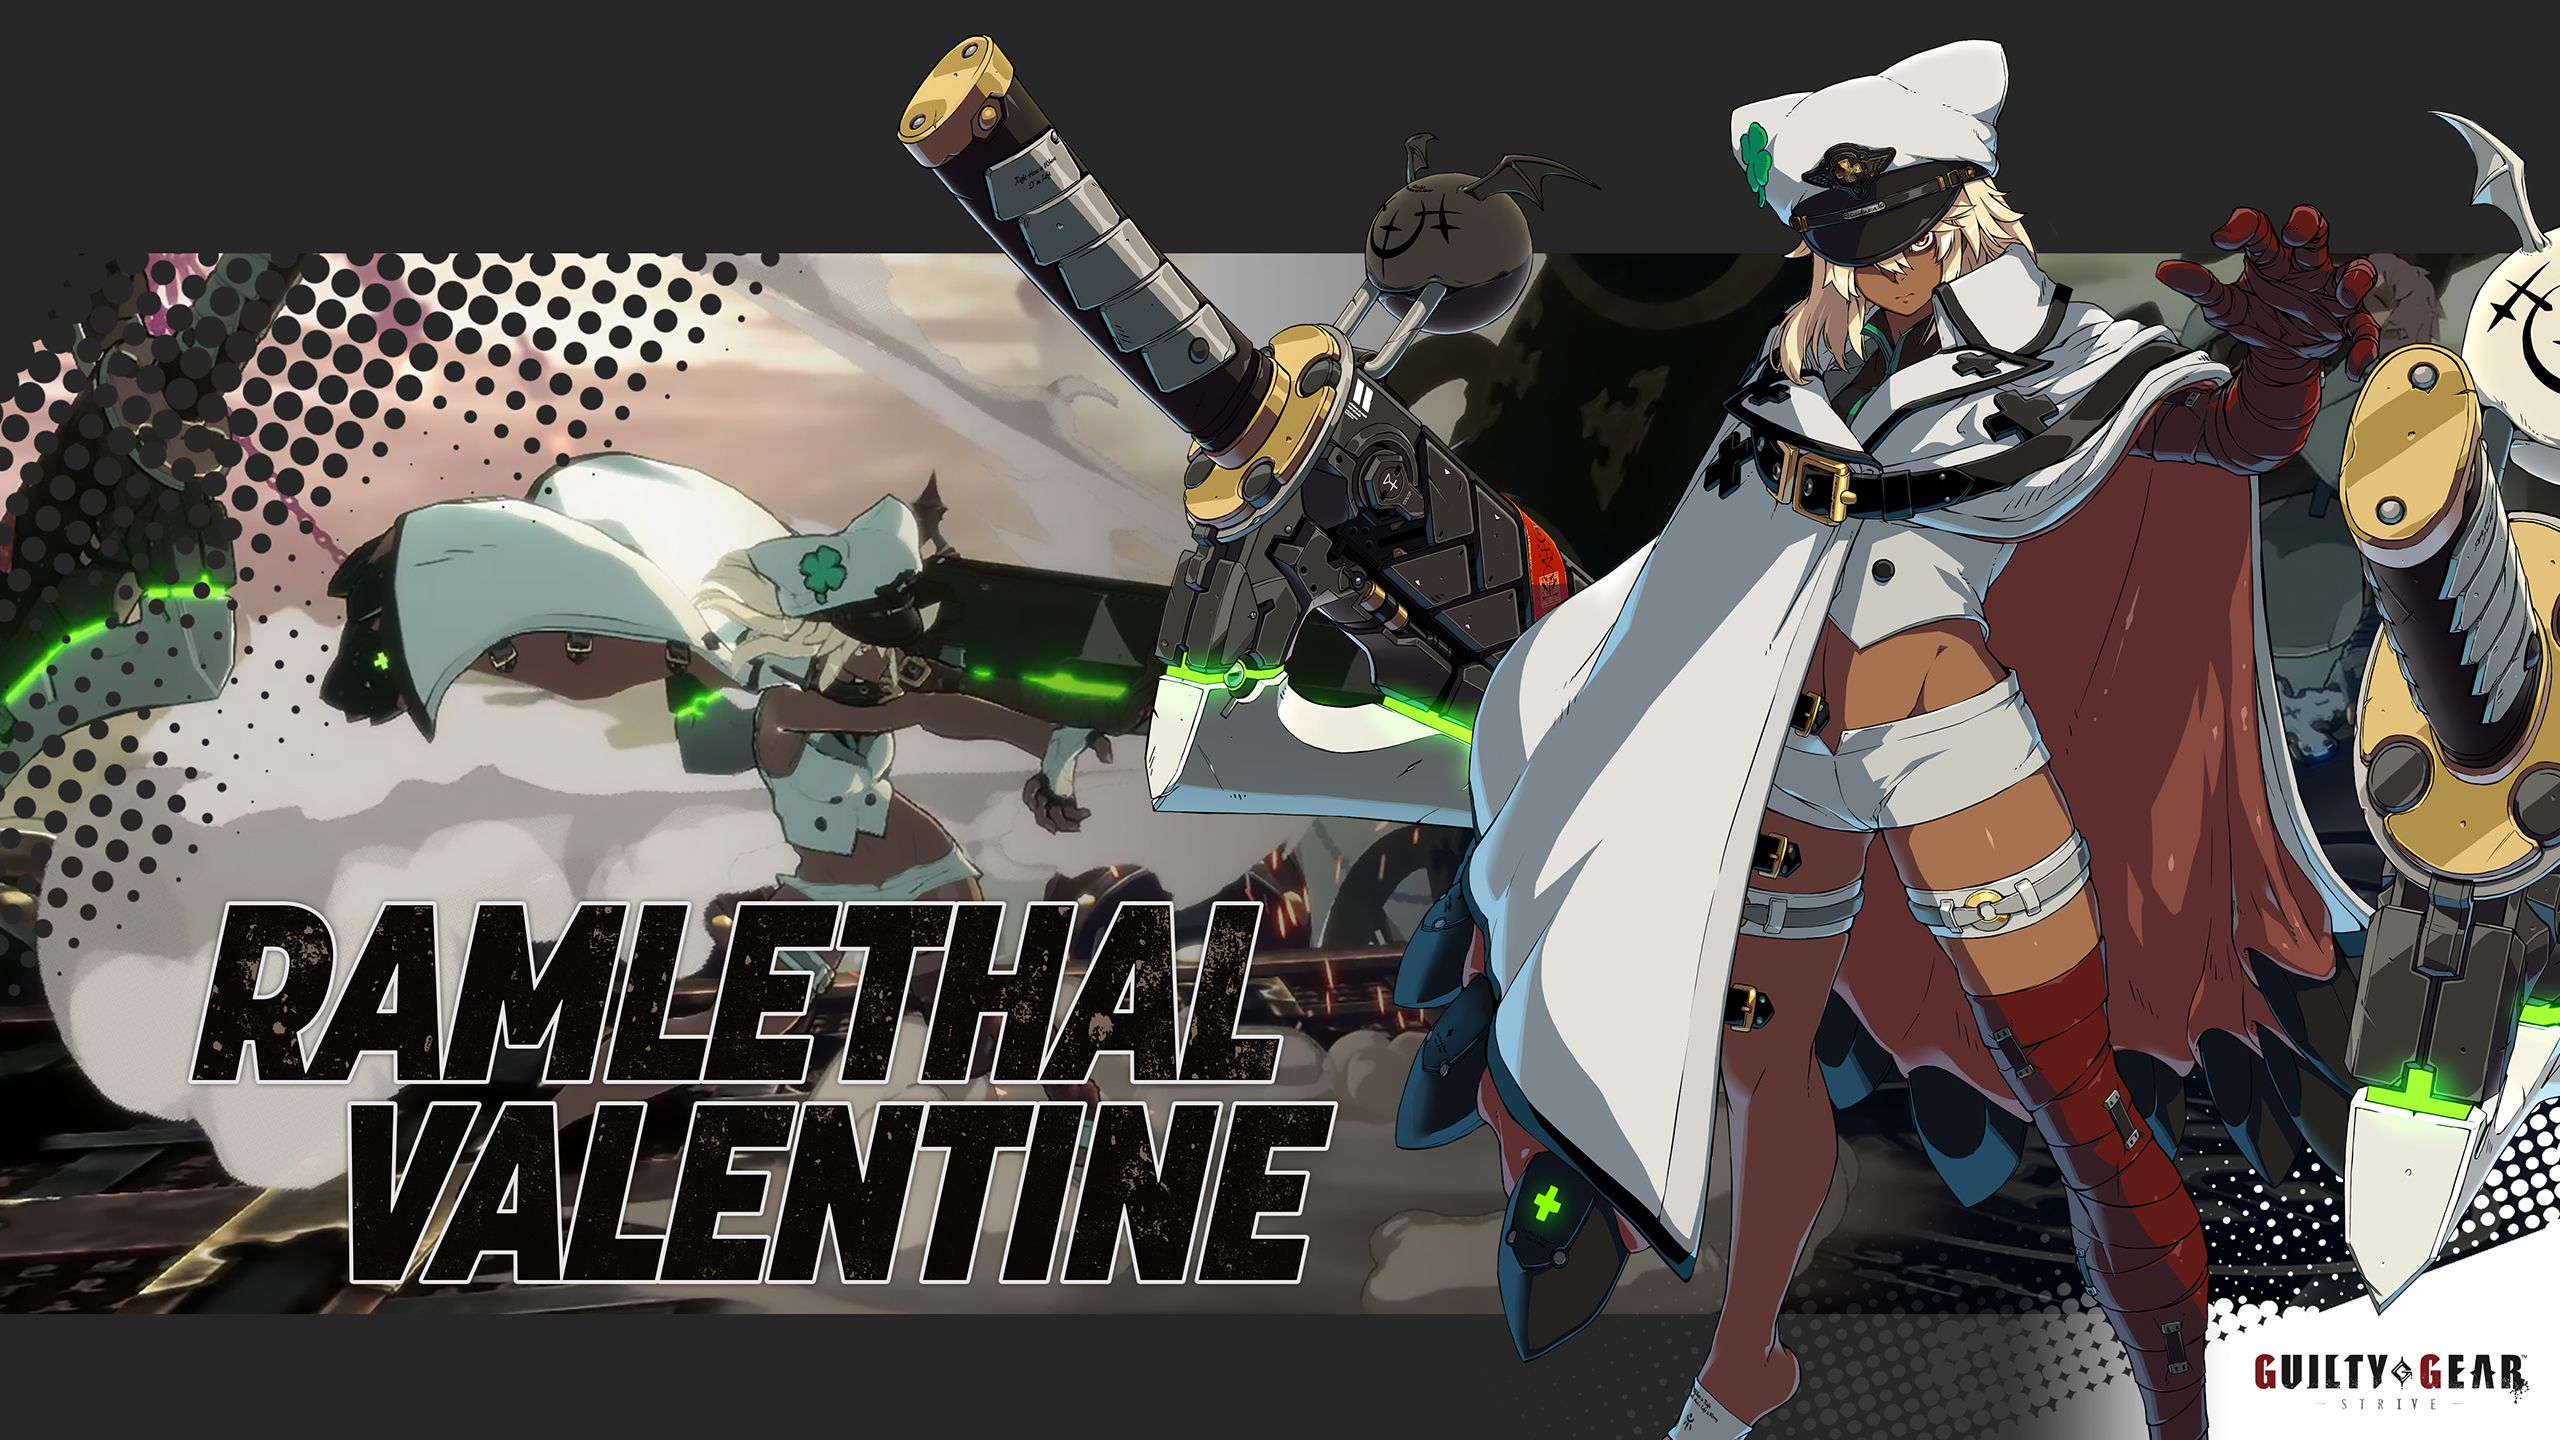 Guilty Gear Strive Goldlewis Dickinson Wallpapers - Cat with Monocle